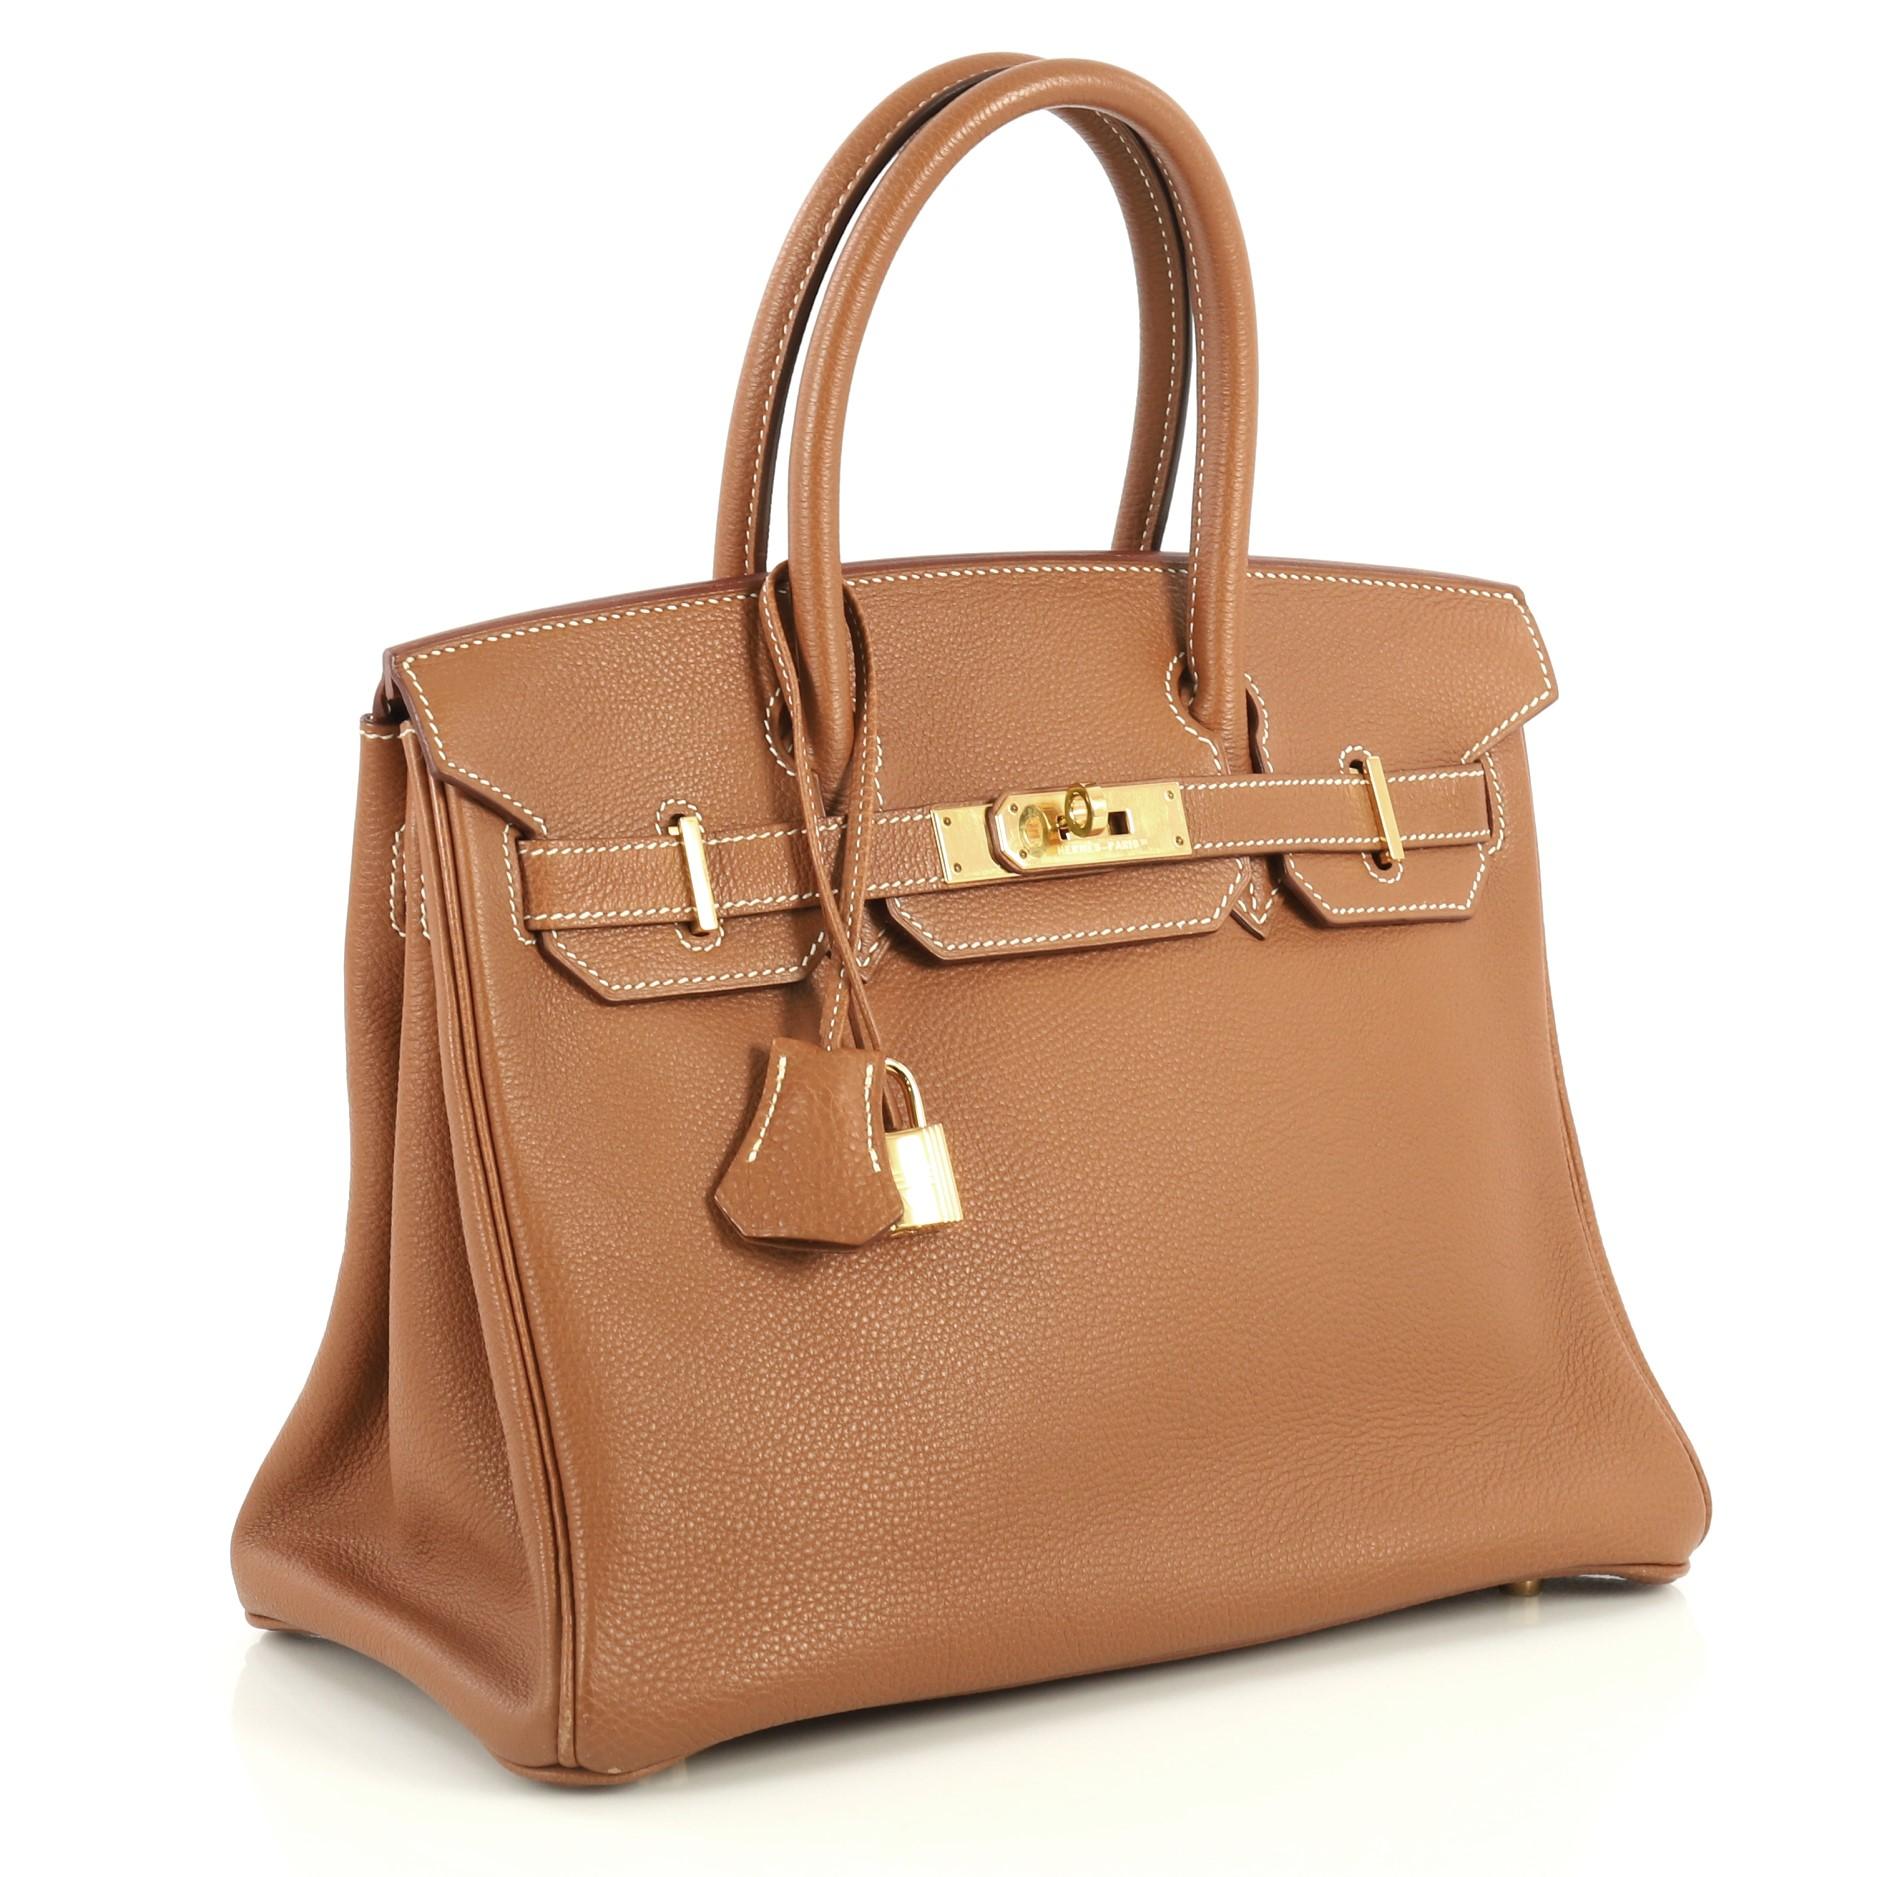 This Hermes Birkin Handbag Gold Togo with Gold Hardware 30, crafted in Gold brown Togo leather, features dual rolled handles, frontal flap, and gold hardware. Its turn-lock closure opens to a Gold brown Chevre leather interior with zip and slip